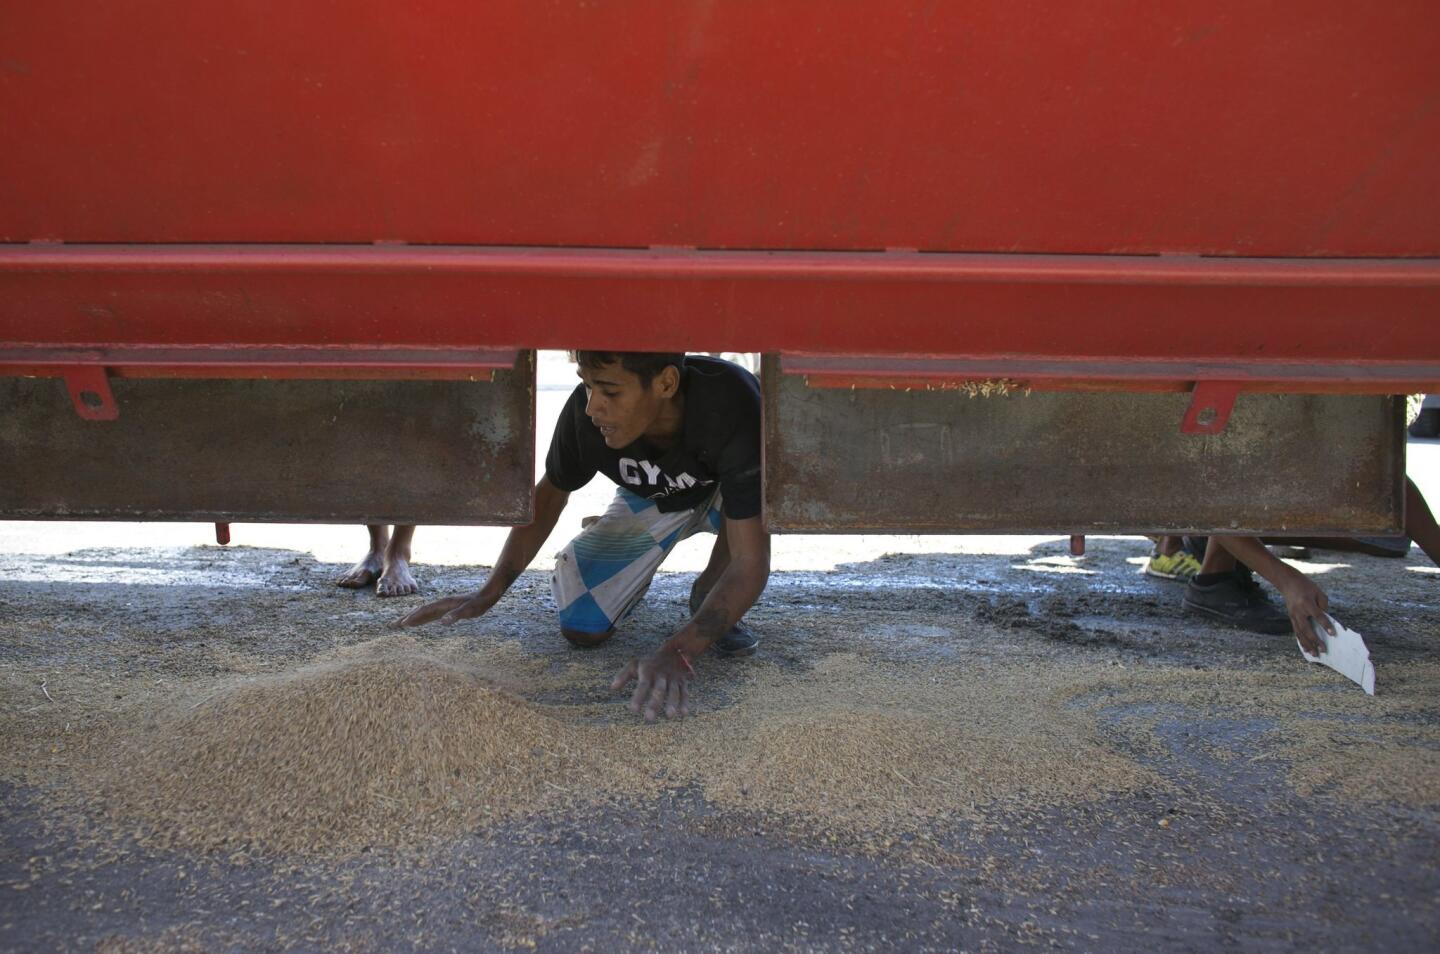 A man collects rice that fell from a cargo truck waiting to enter the port and refill in Puerto Cabello, Venezuela, on Nov. 14, 2016. At the ports, food sometimes rots even as 90 percent of Venezuelans say they can't afford enough to eat.